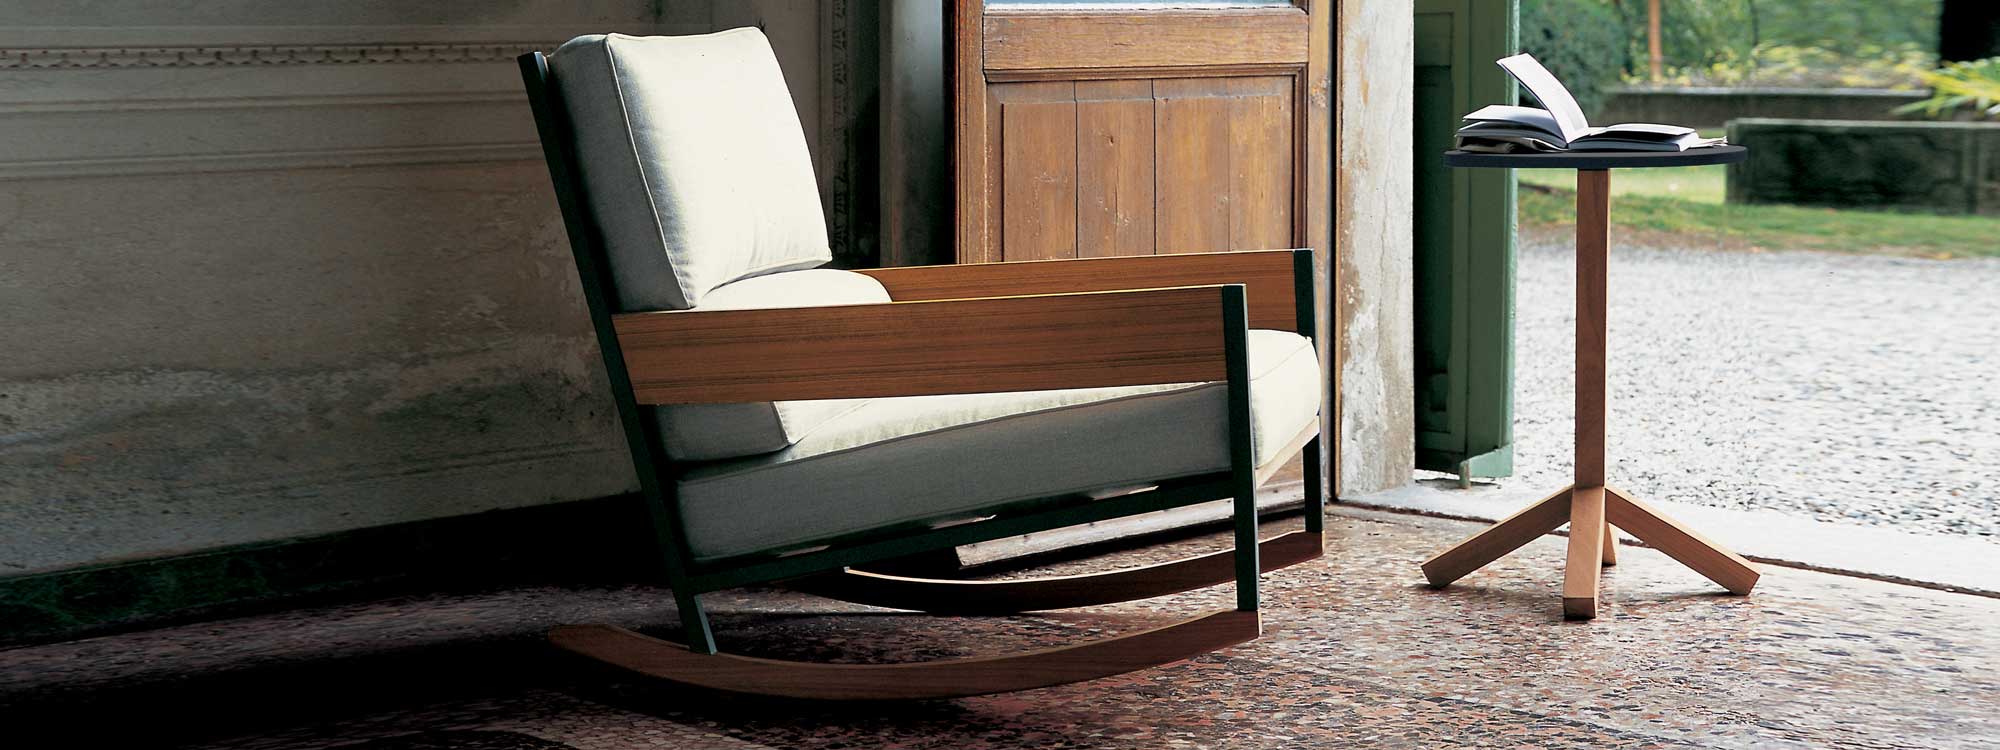 Interior image of RODA Nap rocking chair in teak and smoke-colored stainless steel and white cushions, next to Root side table